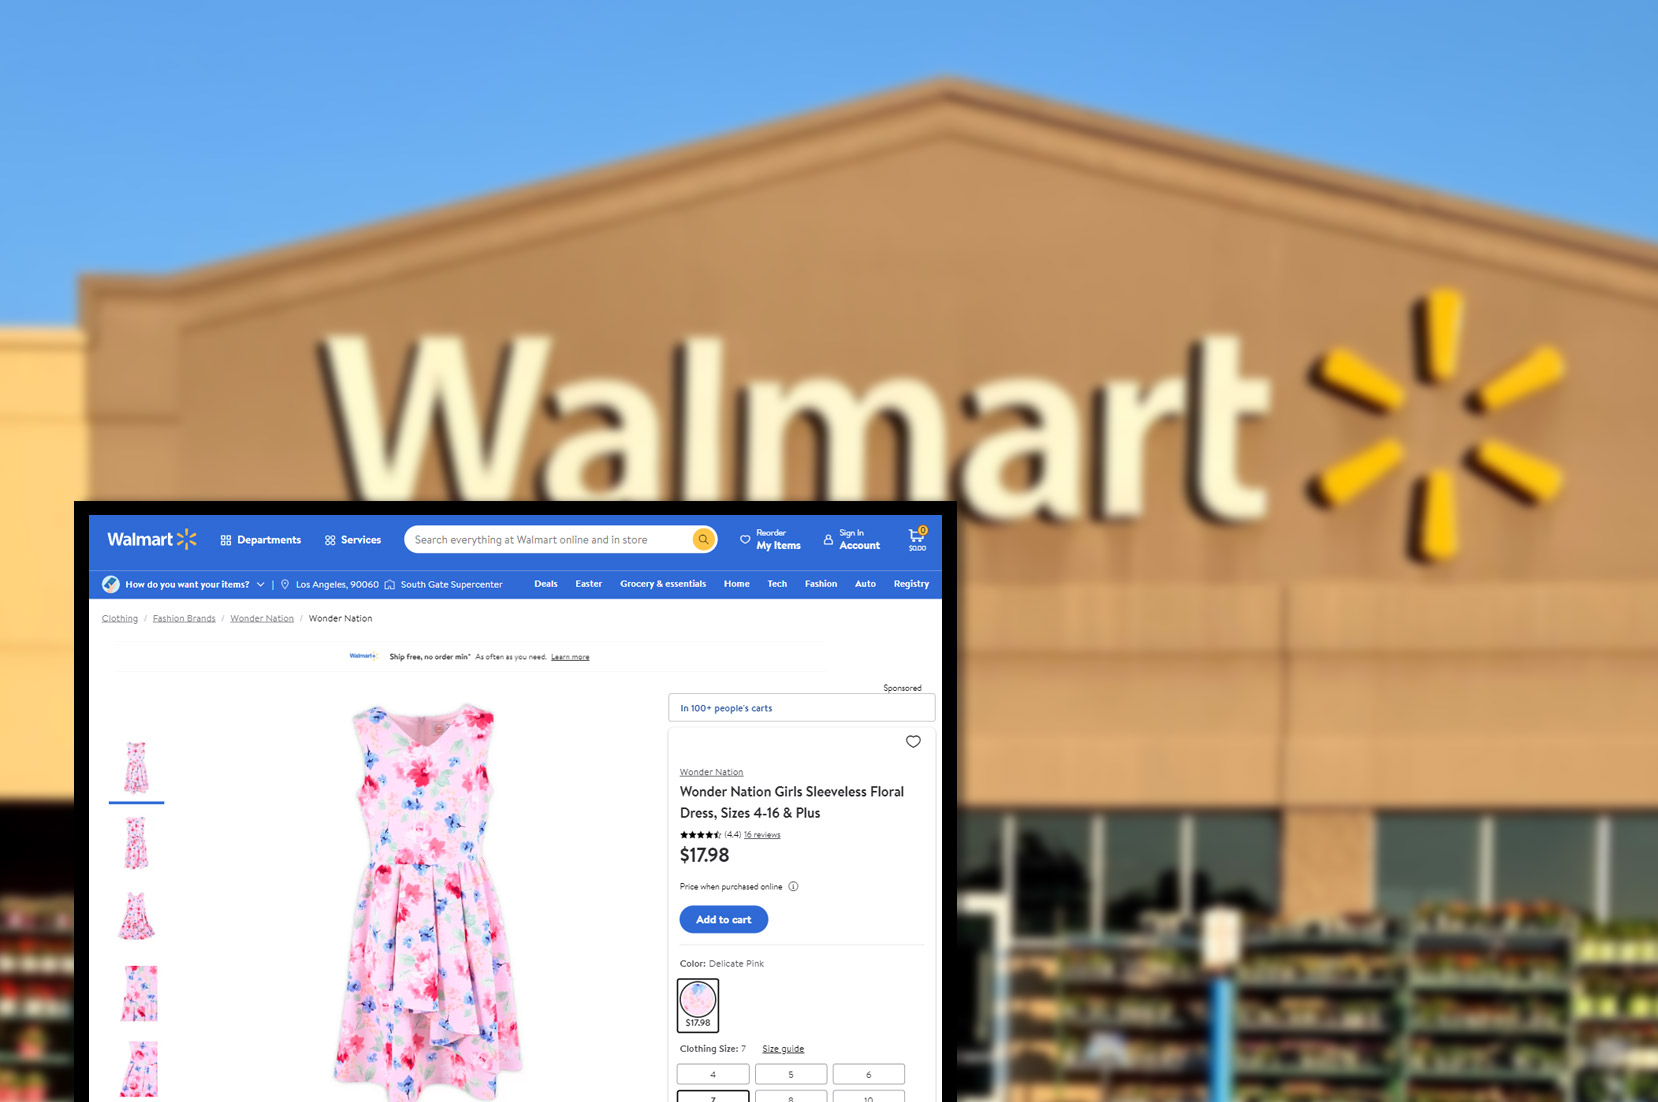 walmarttogo-comproduct-pricing-information-and-image-scraping-services